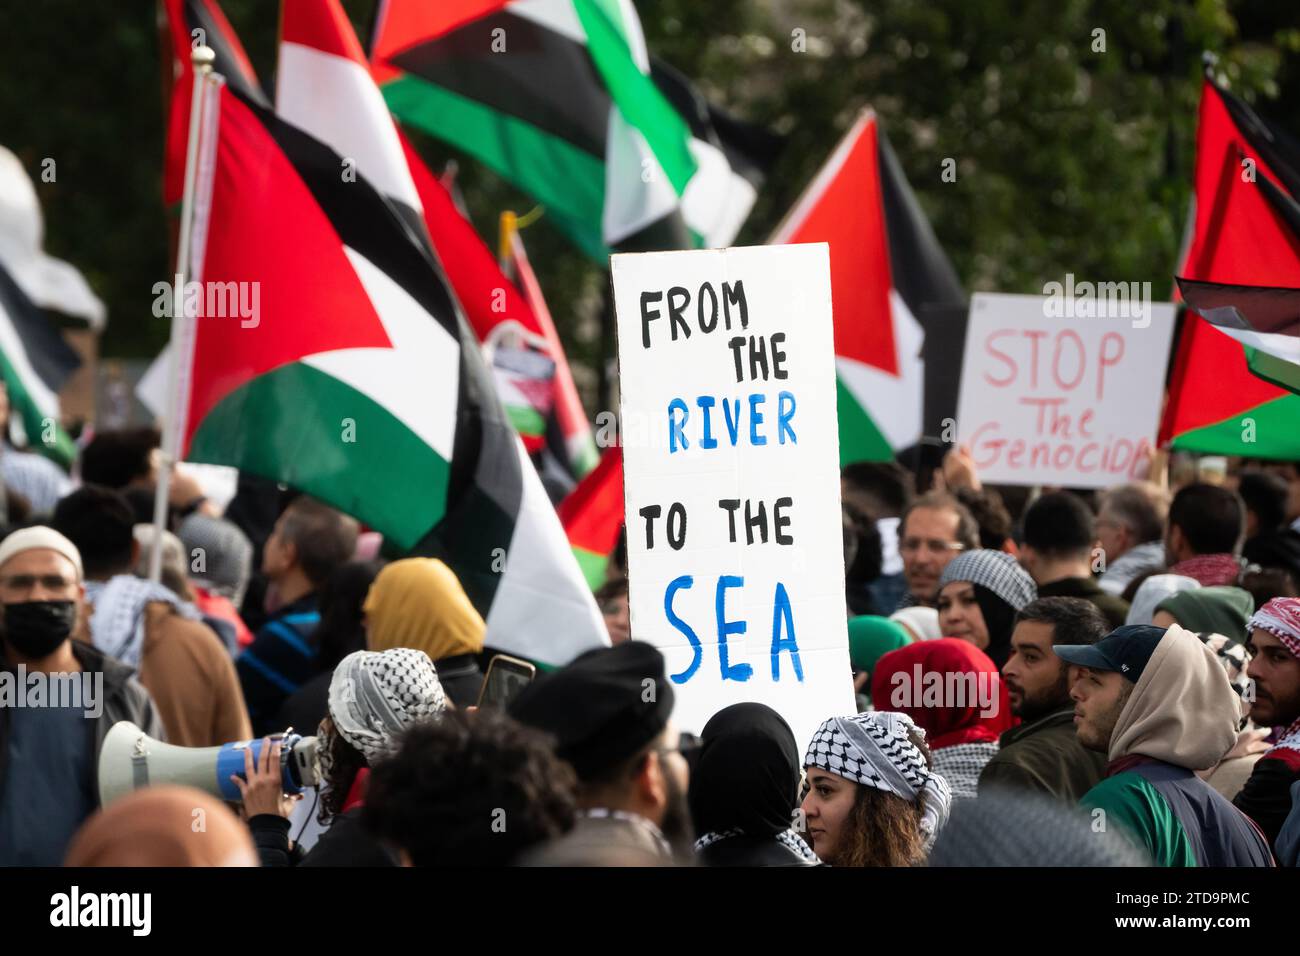 A protestor holds a sign with the 'River to the Sea' slogan often considered to be genocidal at a pro-Palestinian rally in Mississauga, ON. Stock Photo